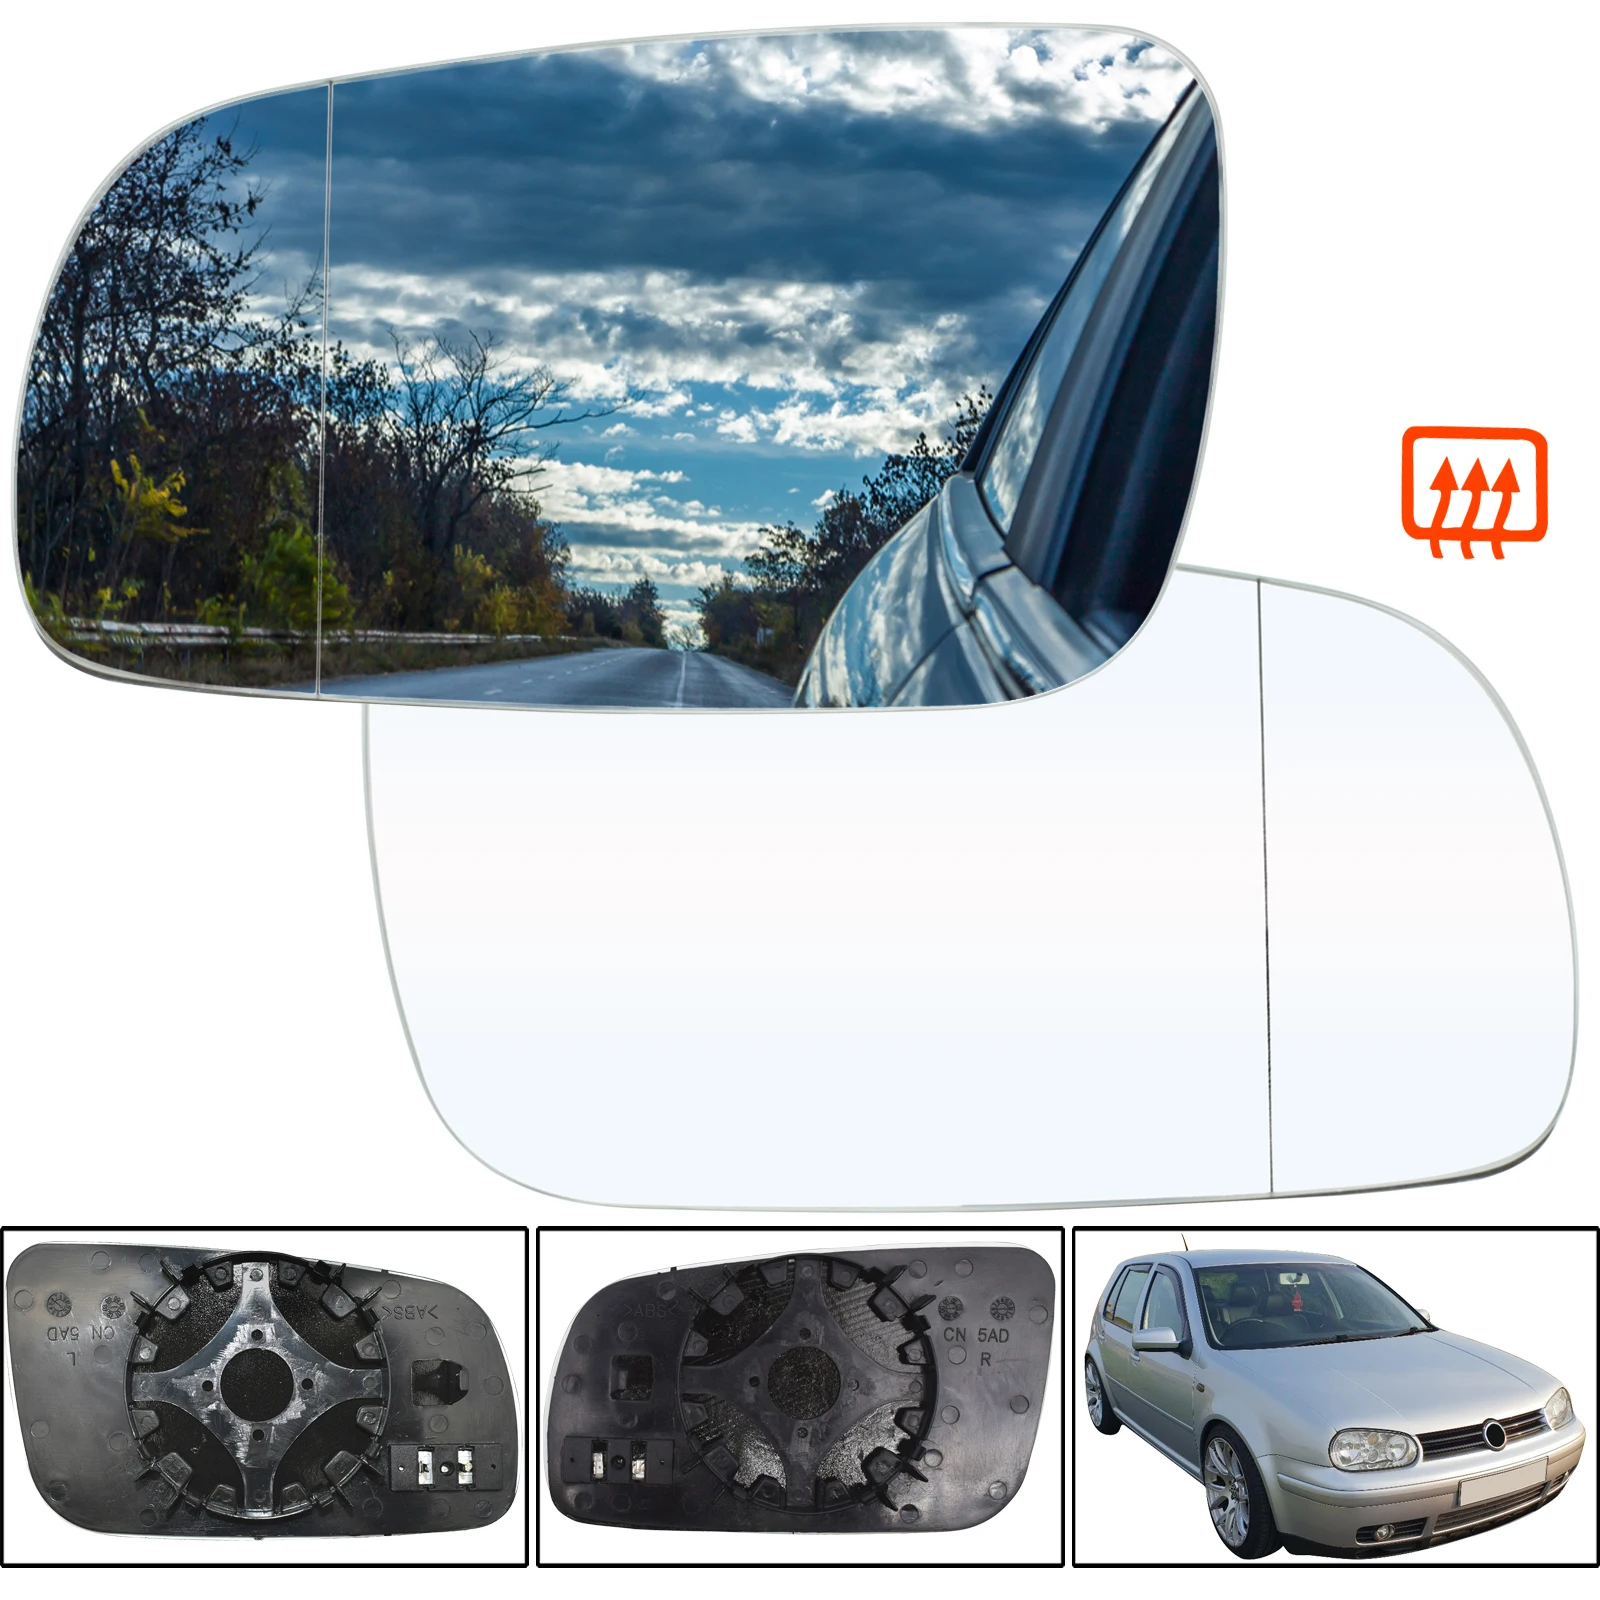 

For Vw Jetta Golf Mk4 Passat 1999 - 2004 Left / Right Driver Passenger Door Side Wing Mirror Glass Heated Bigger With Back Plate